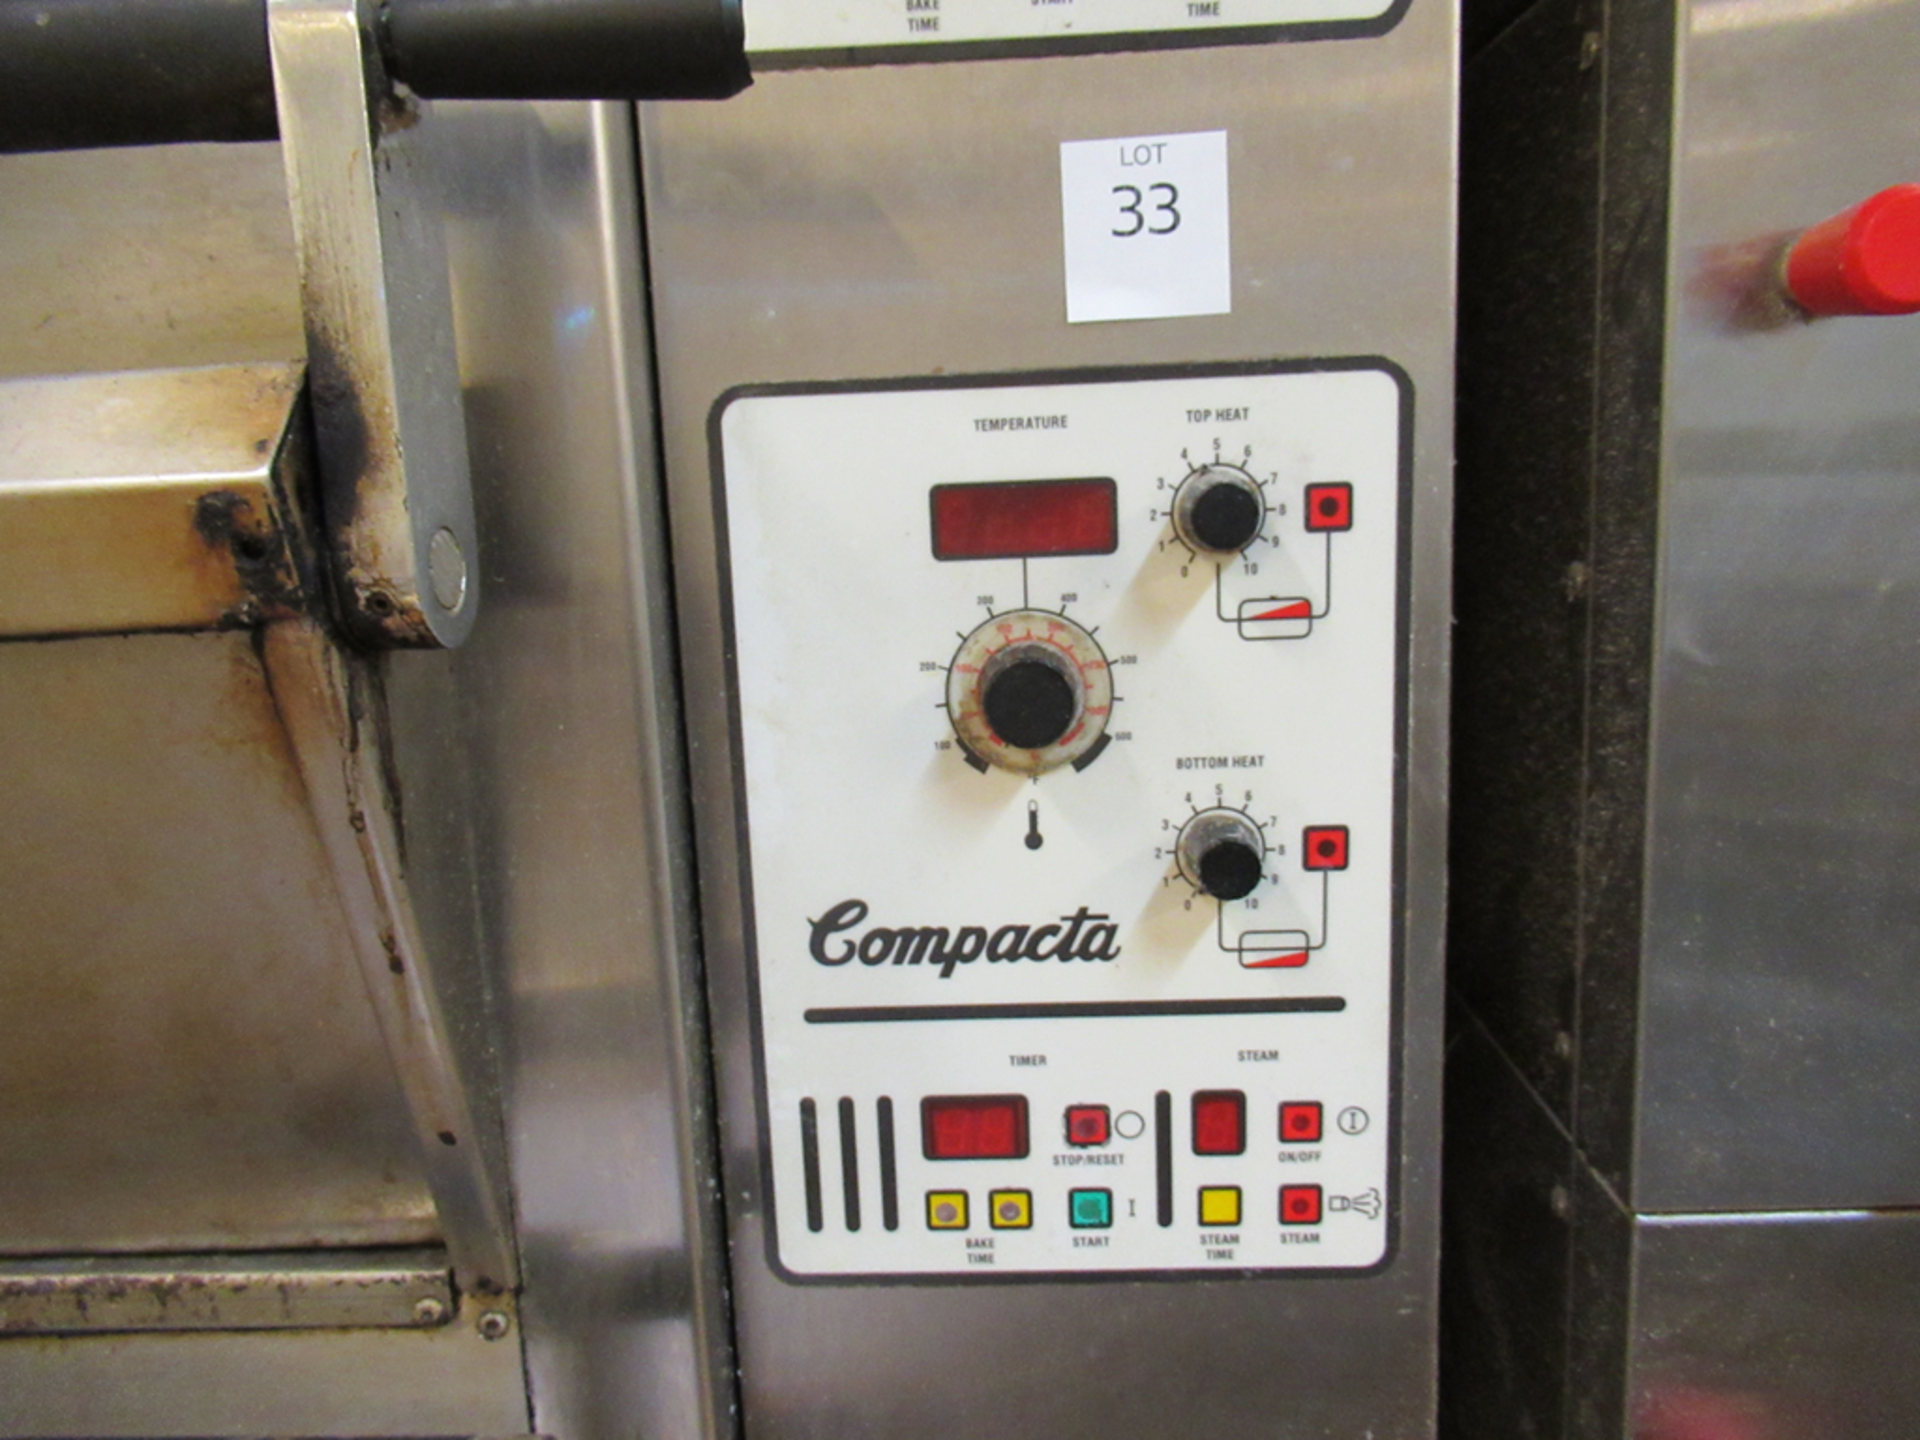 Tom Chandley Compacta 5-deck 3PH Electric Baker's Oven - Image 2 of 3